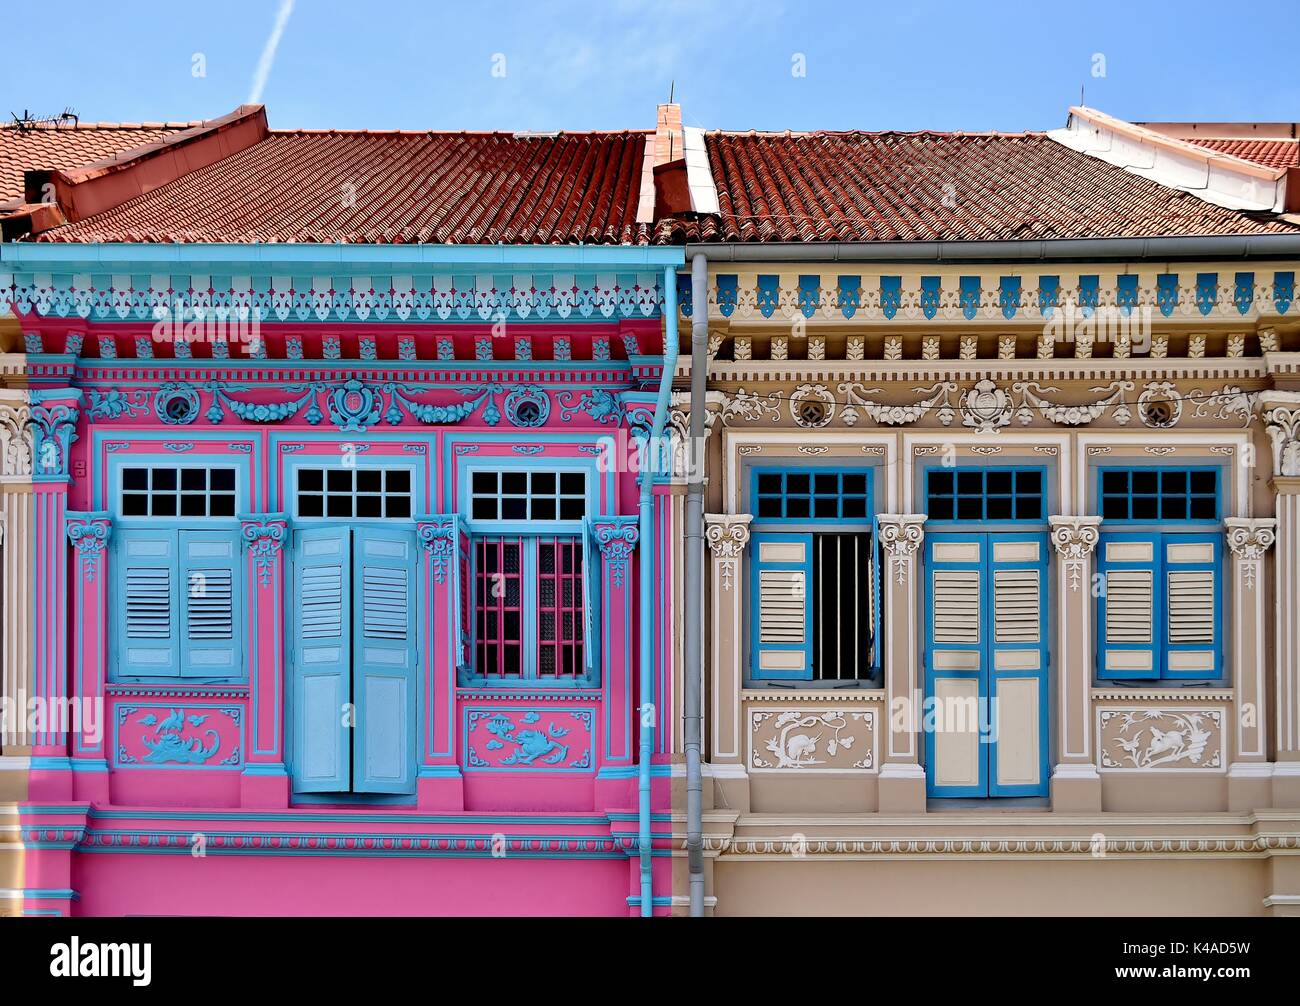 Traditional shop house exteriors with wooden louvered shutters and  ornate columns and carvings in the Joo Chiat District of Singapore. Stock Photo